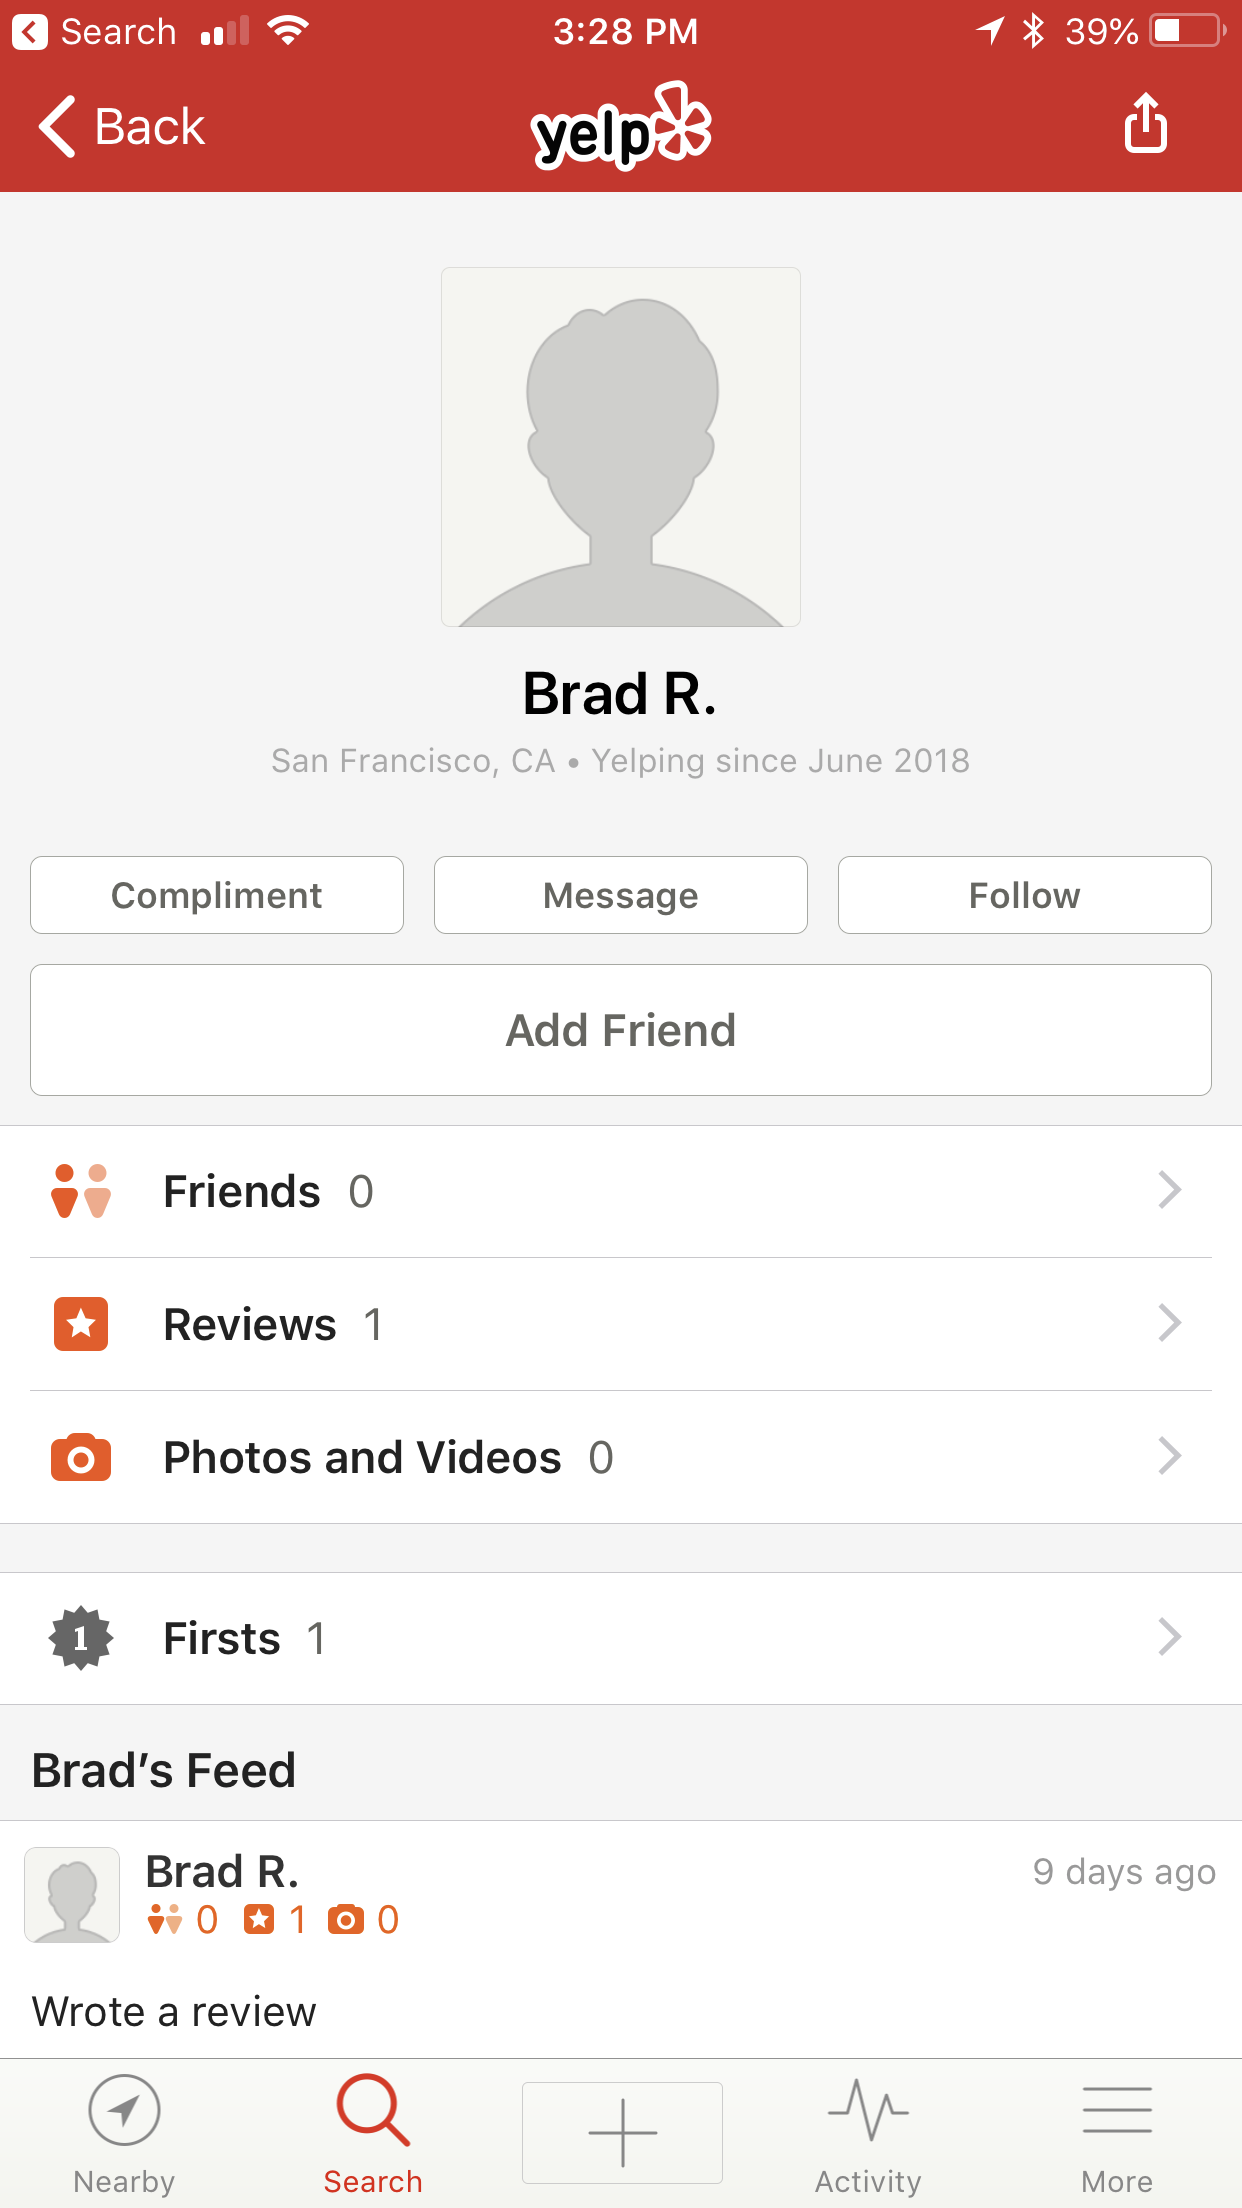 Yelp created 06/2018 under CEO name.. FAKE!!!